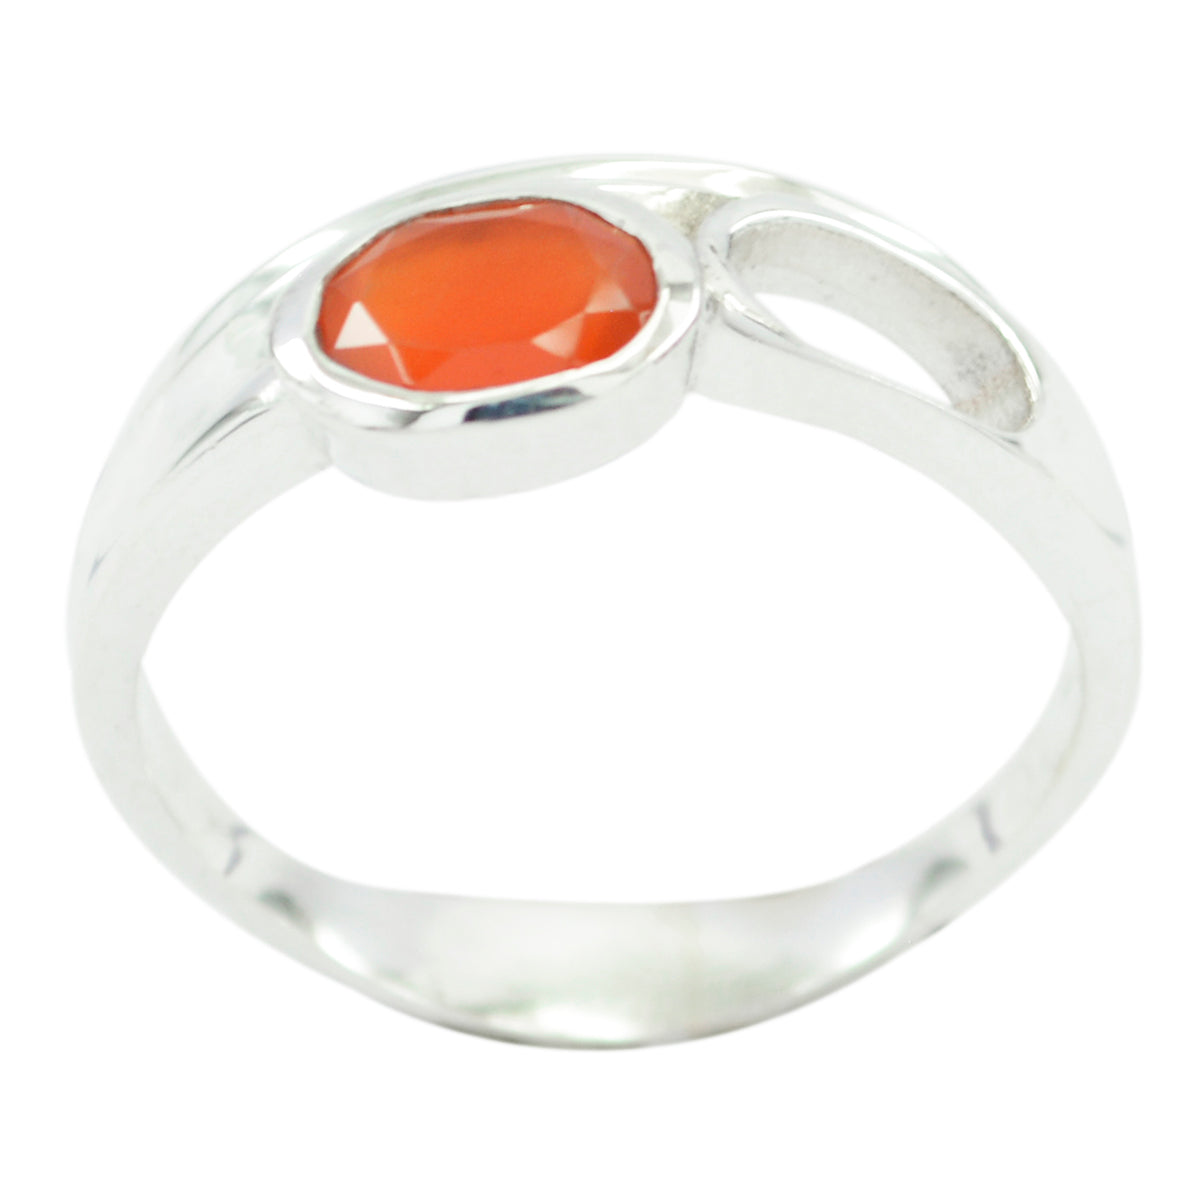 Statuesque Gemstone Red Onyx 925 Sterling Silver Ring Hiphop Jewelry